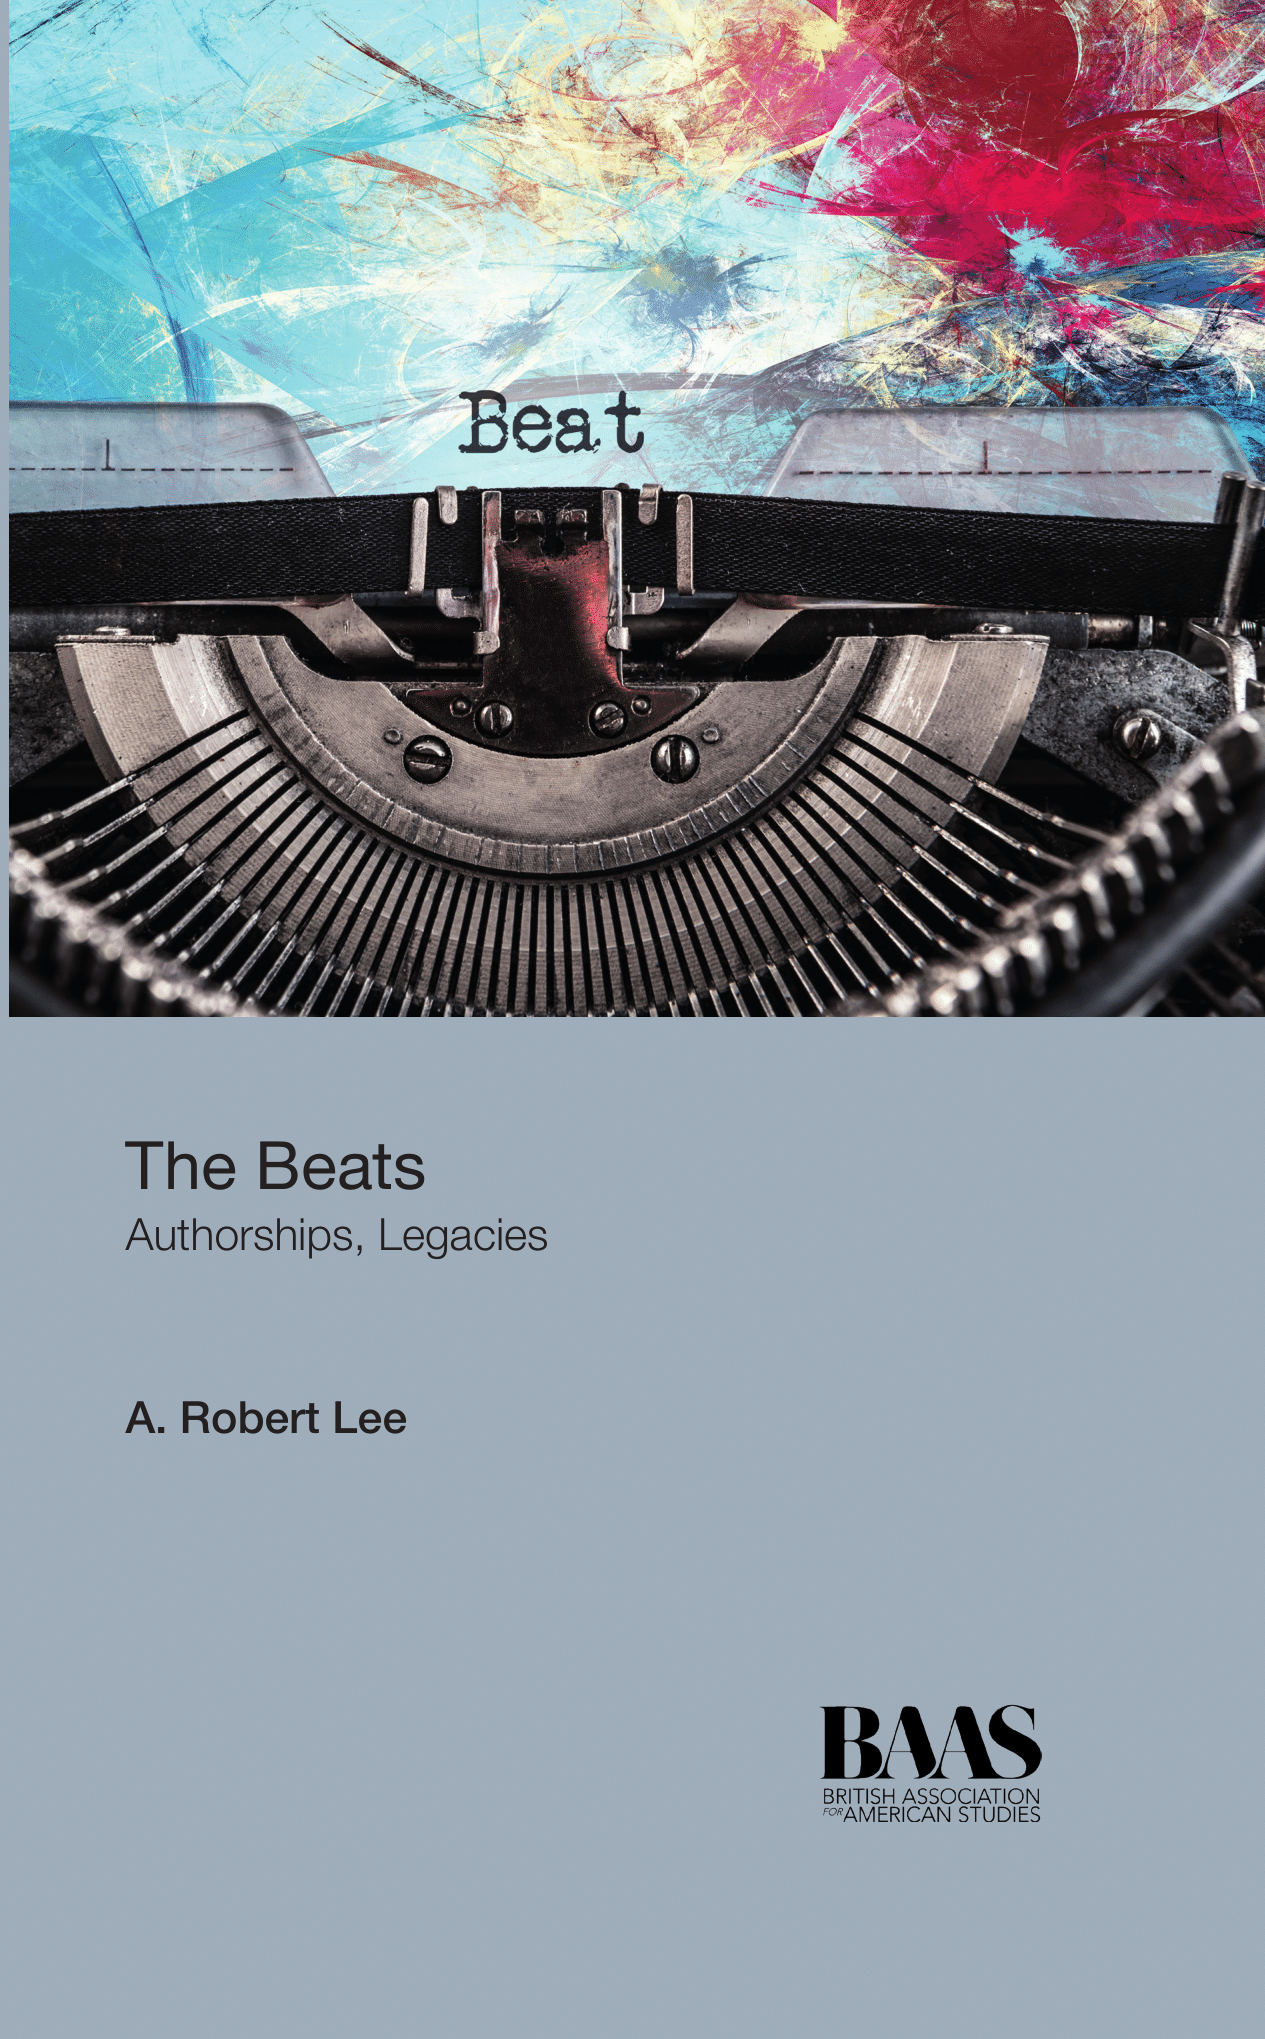 BEAT COVER FINAL-1 (1)